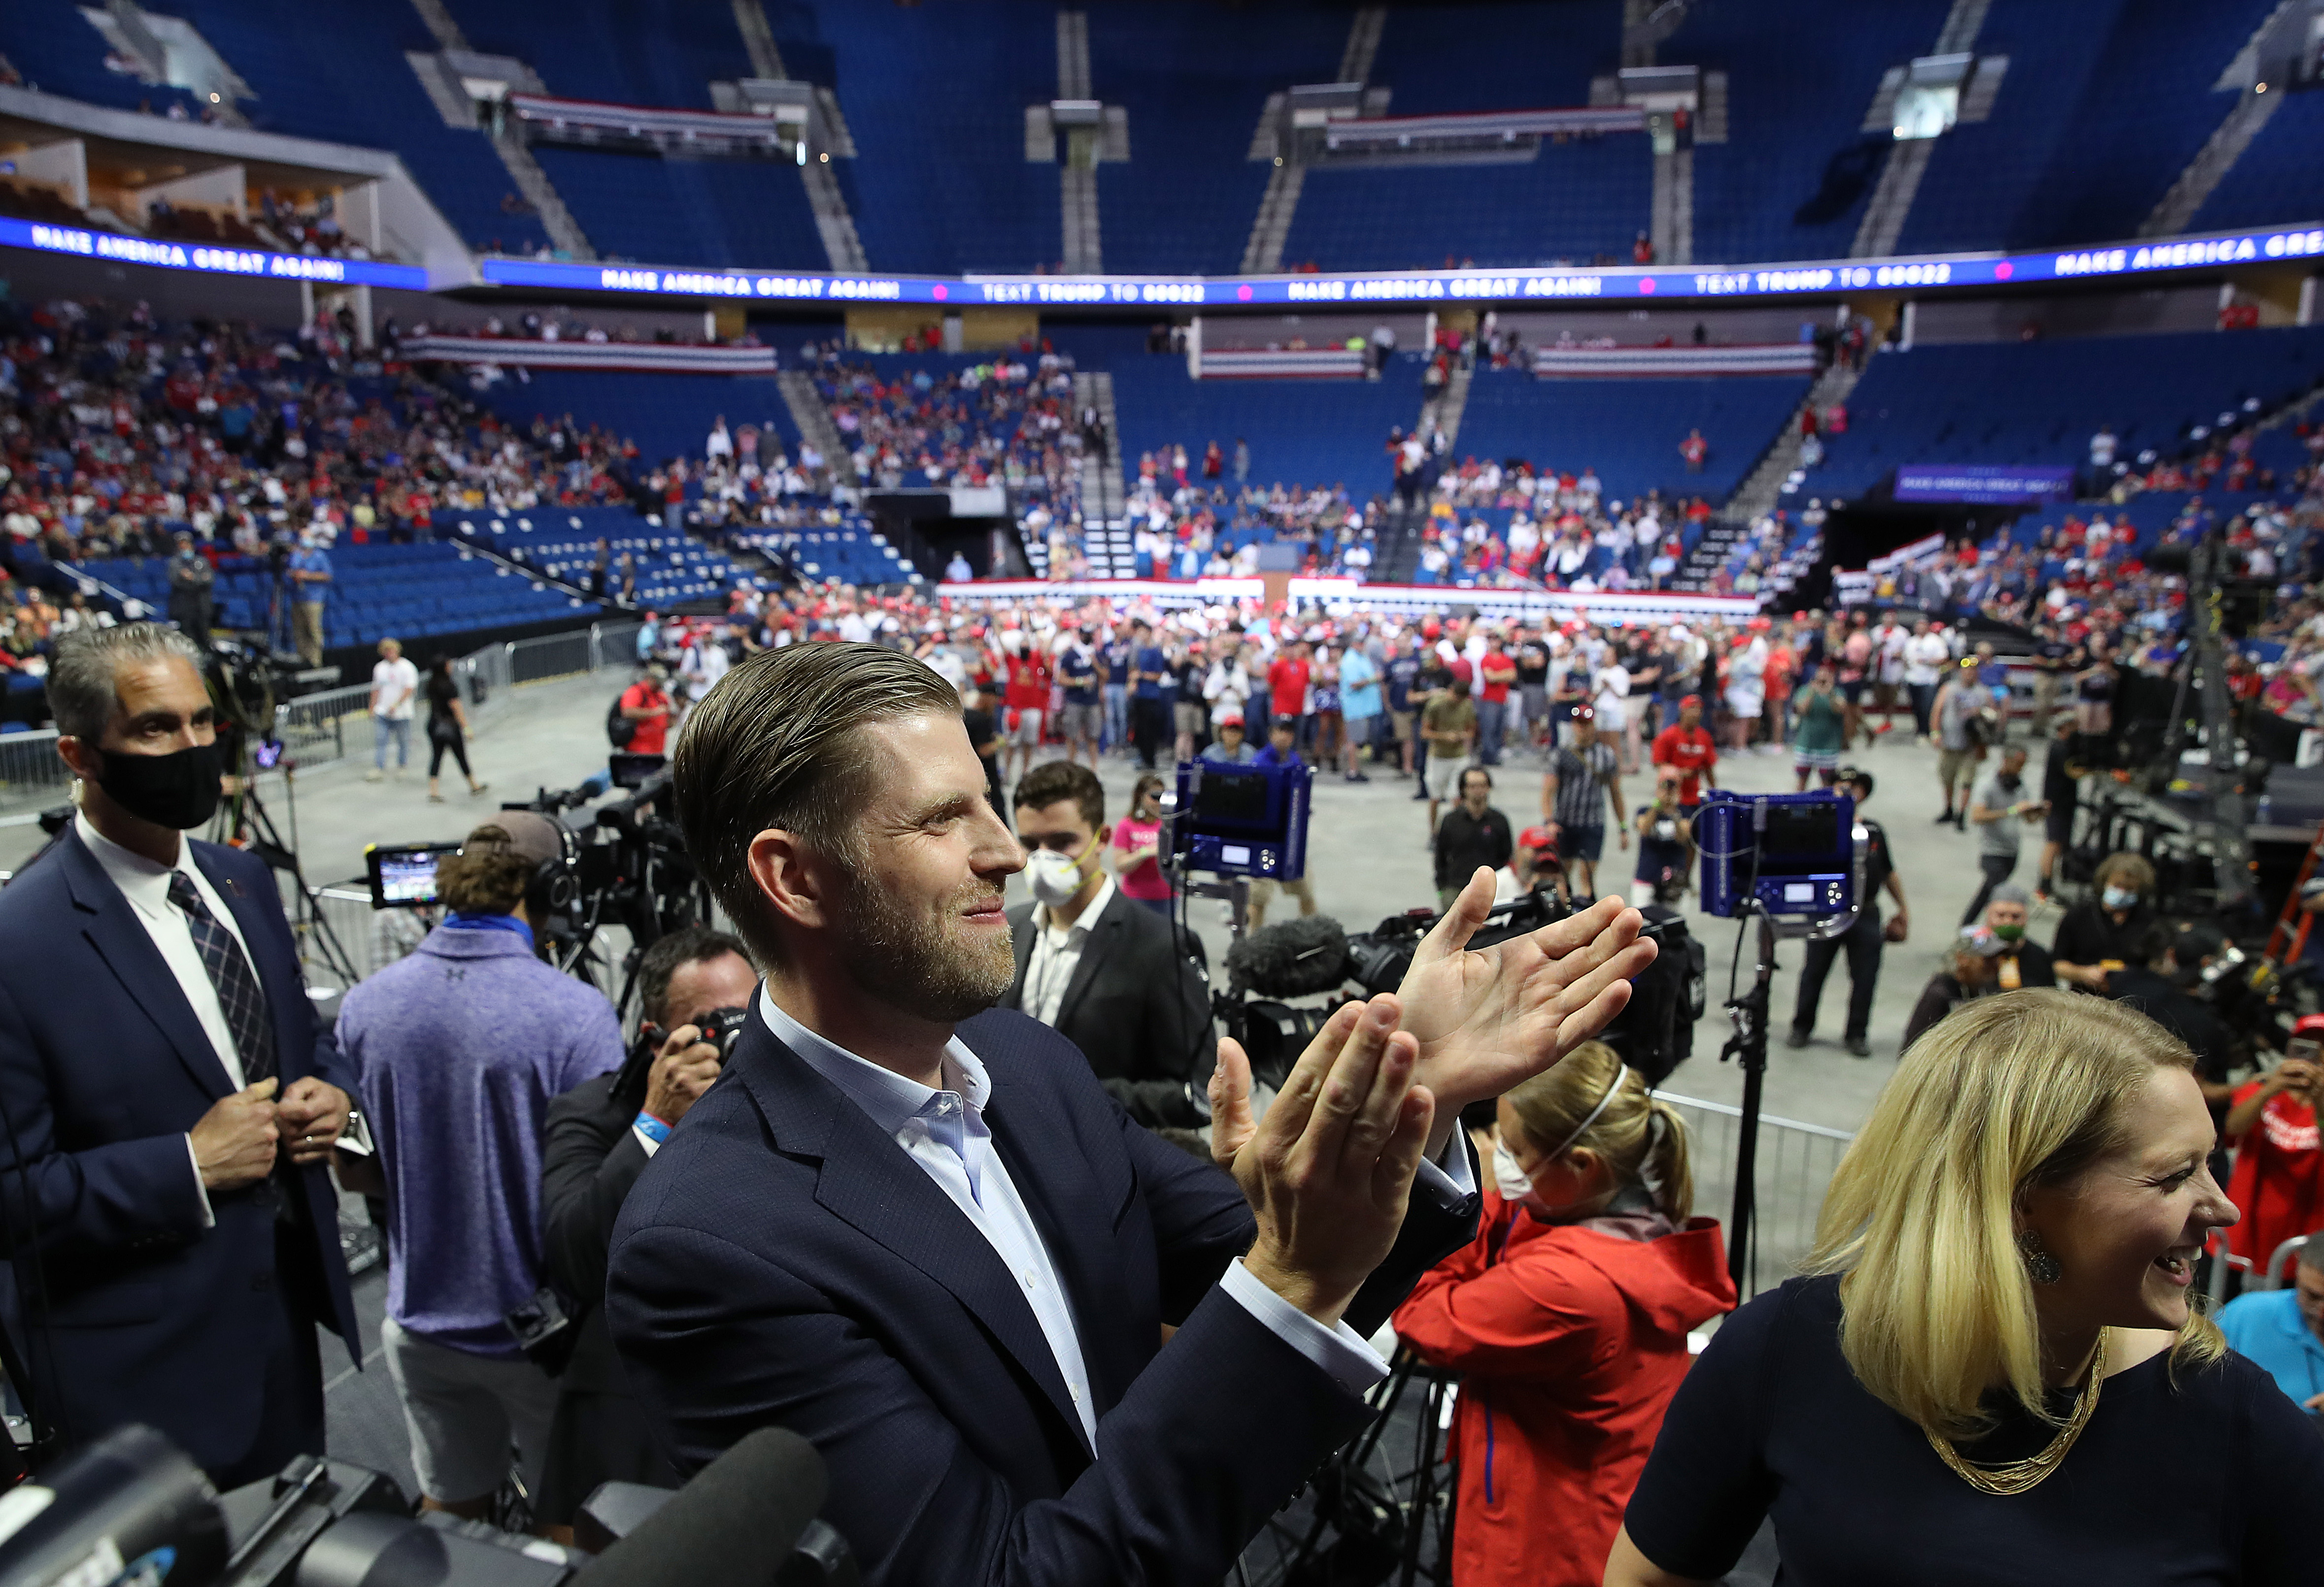 Eric Trump attends a campaign rally for his father U.S. President Donald Trump at the BOK Center, June 20, 2020 in Tulsa, Oklahoma. (Win McNamee/Getty Images)